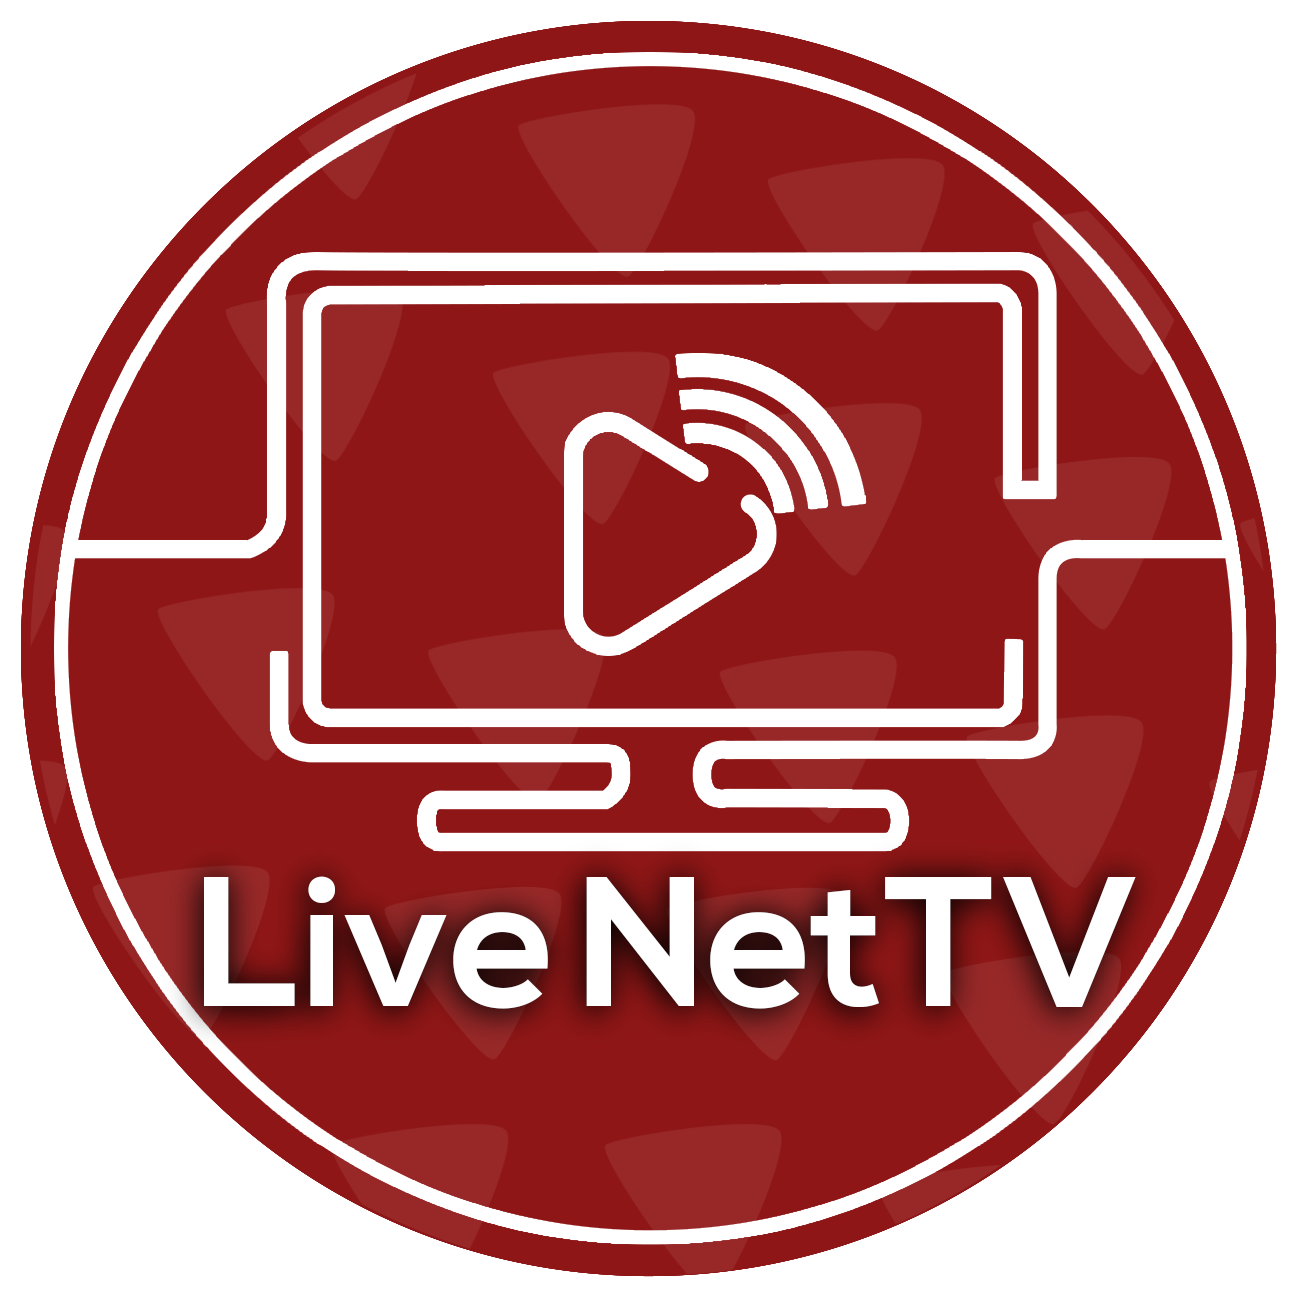 Live NetTV App (v4.8.2) – A Brilliant Way to Stream Live TV Channels on Android